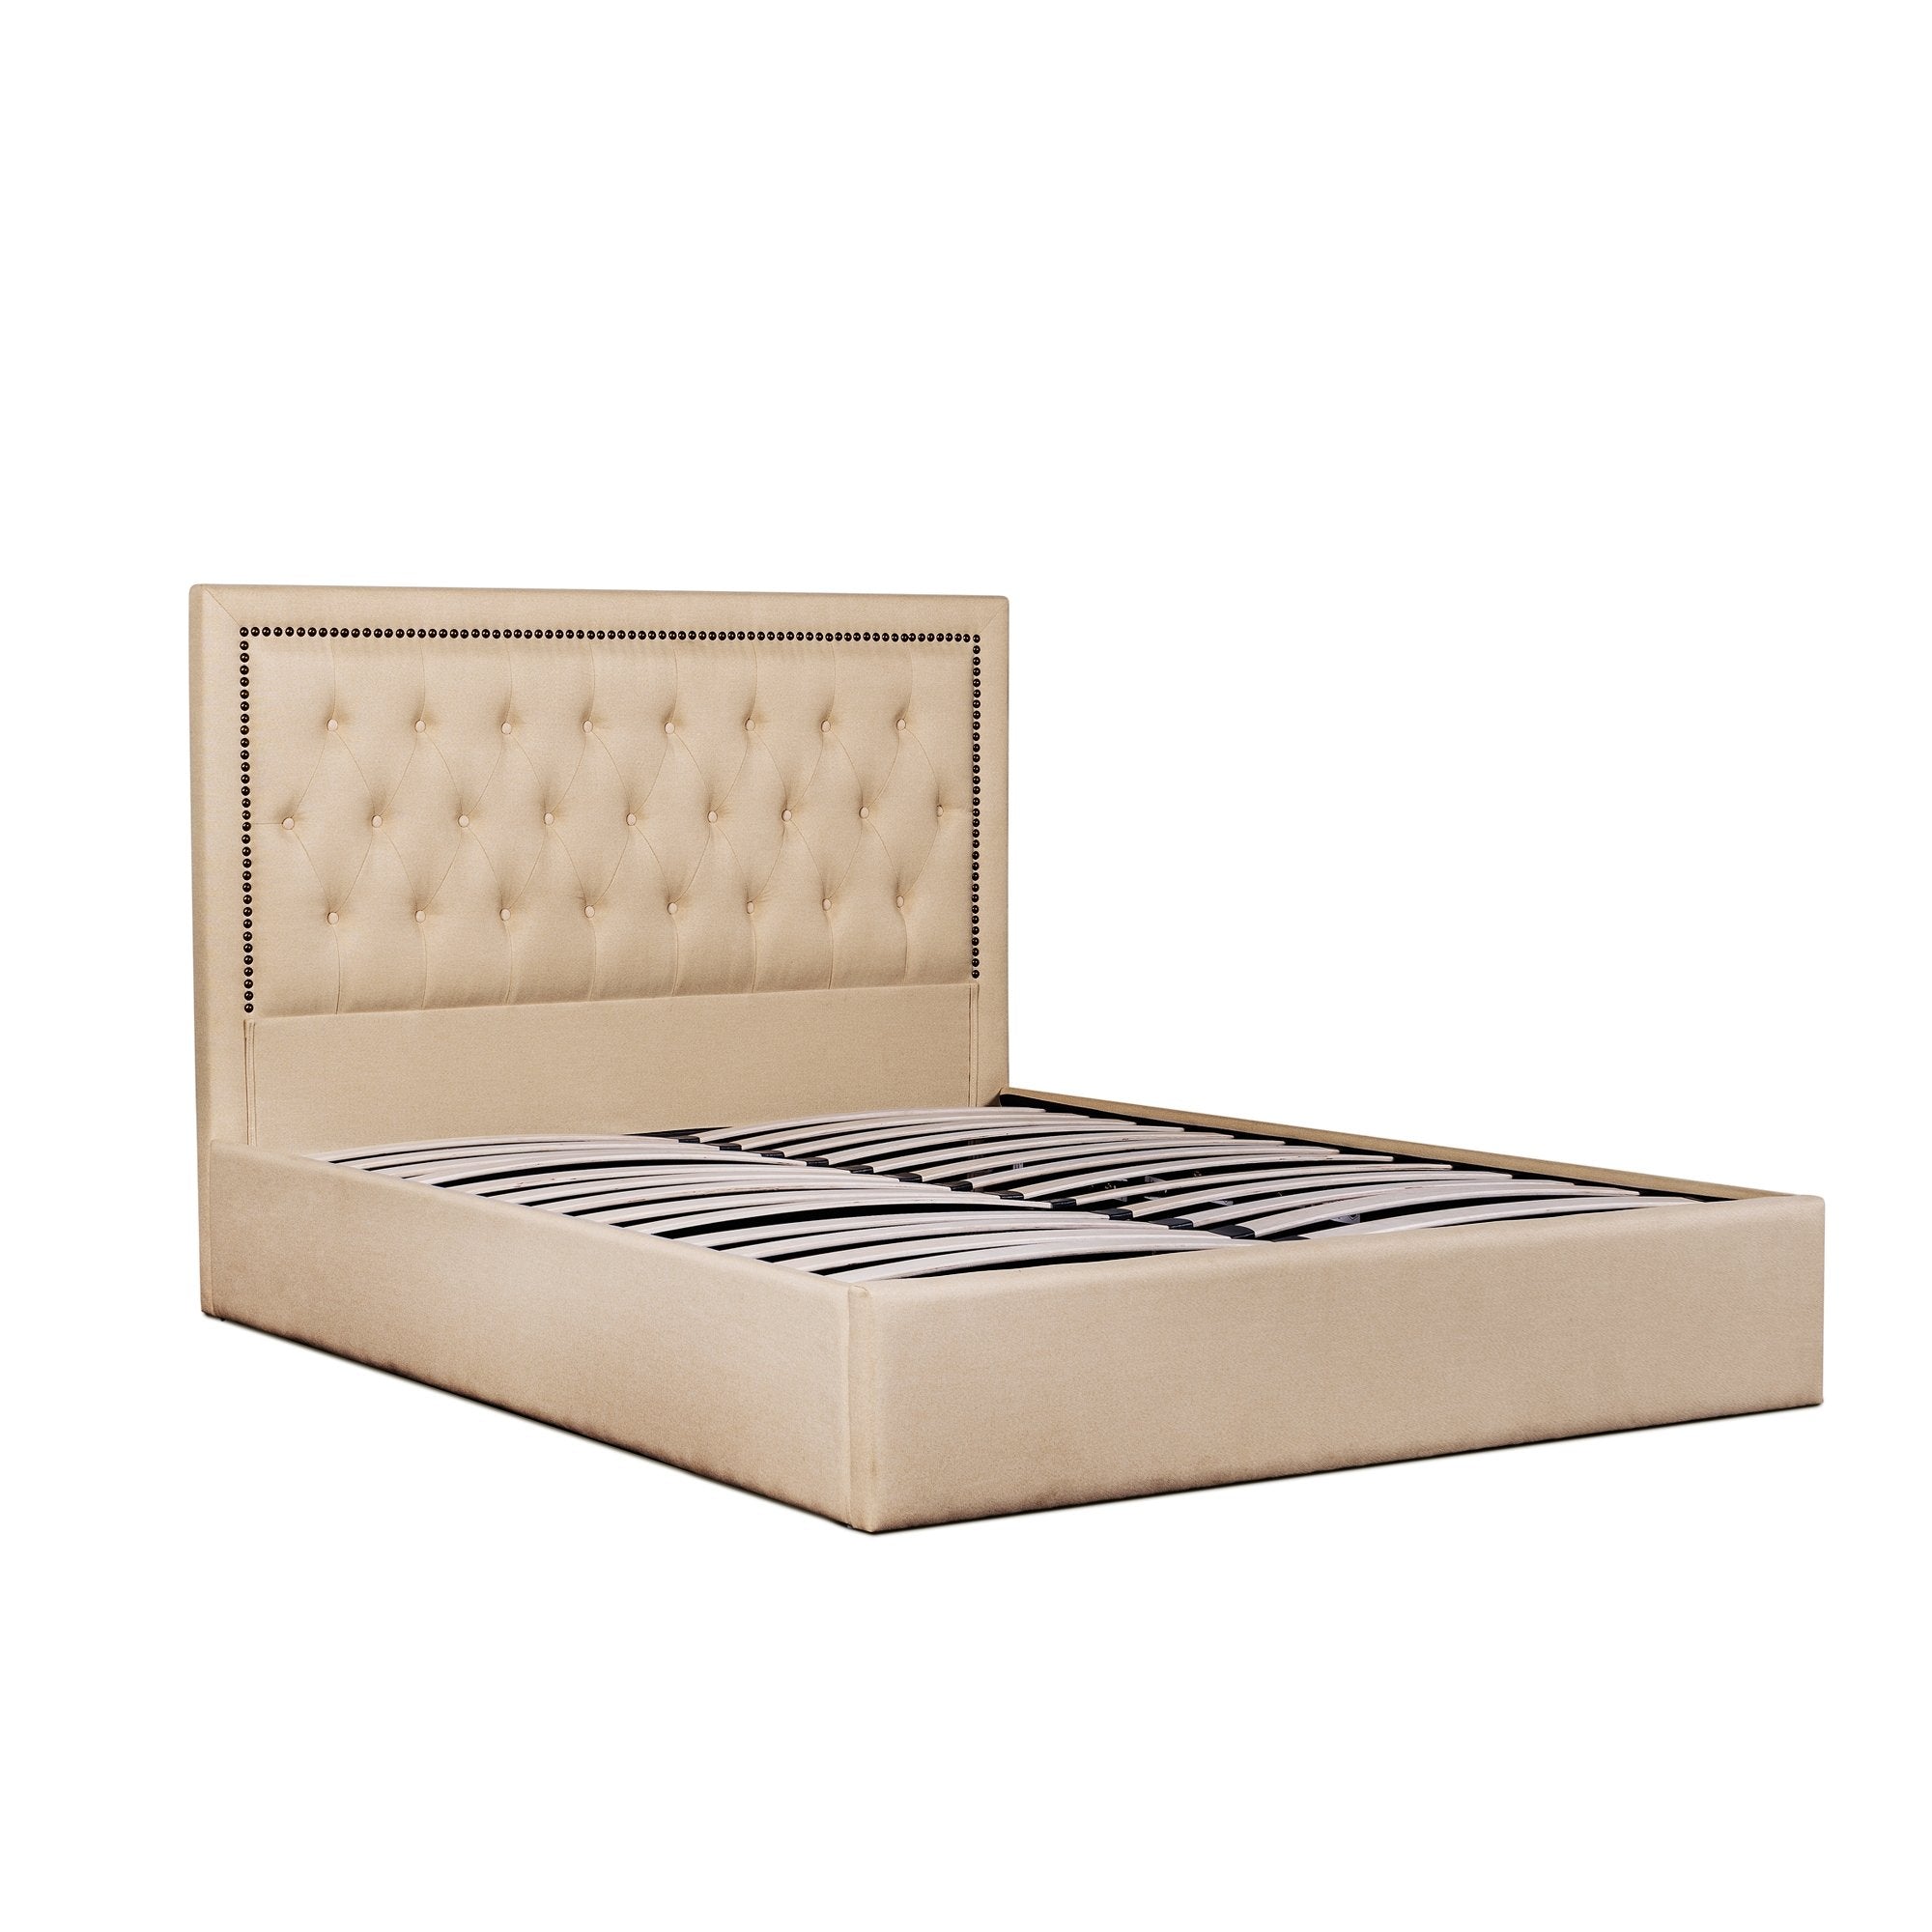 Dane - King Bed in Beige with Tufted Headboard